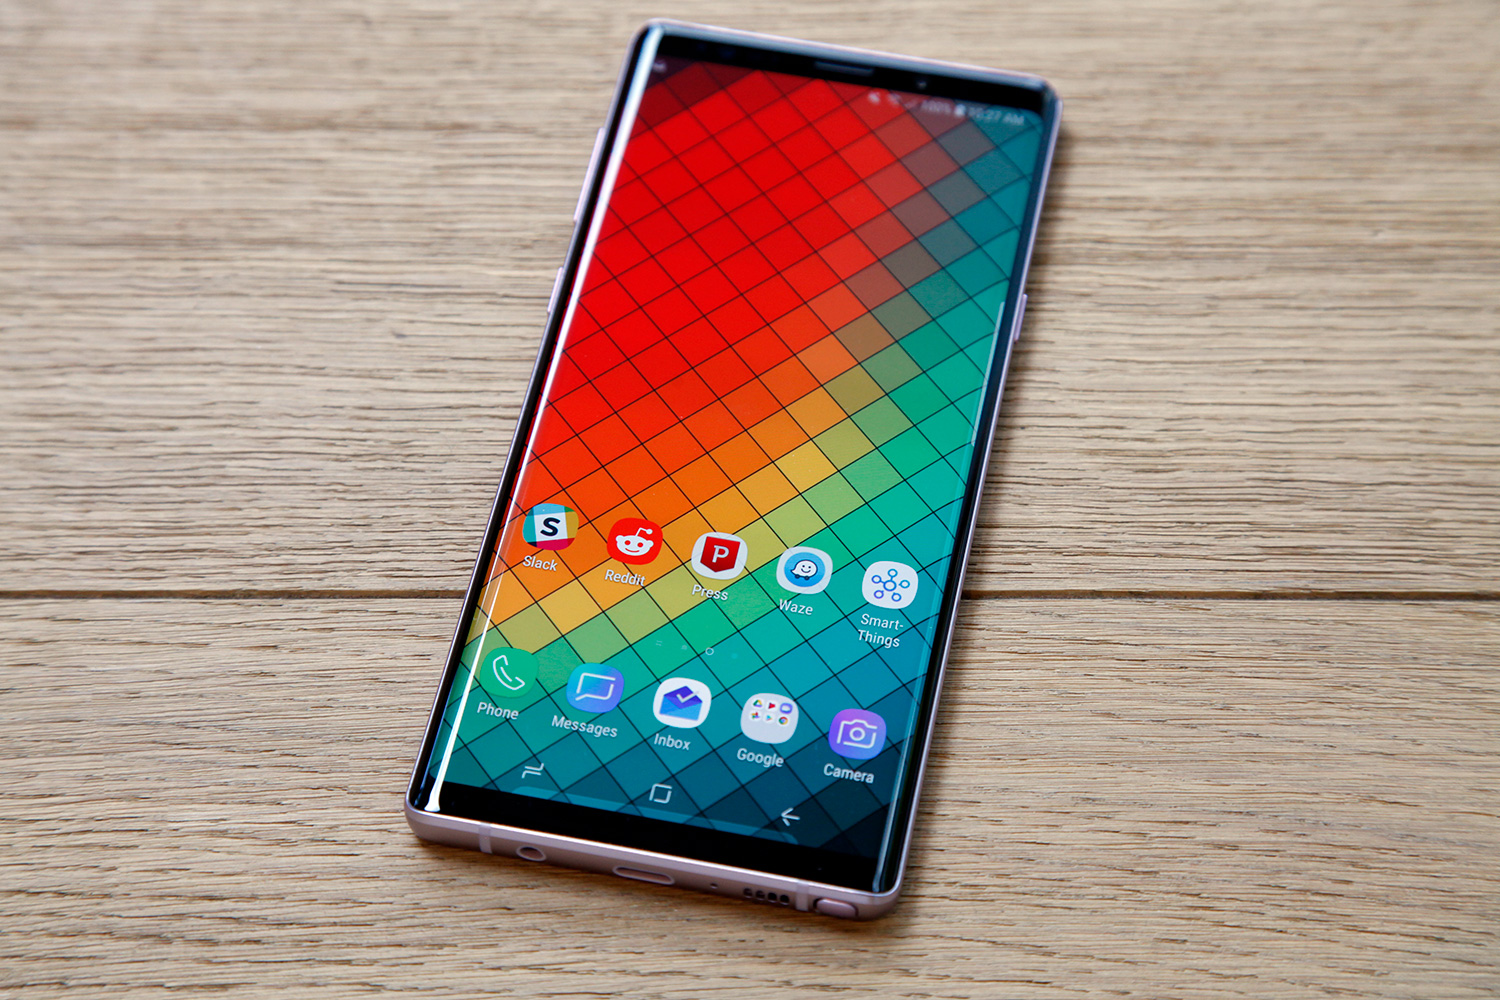 Leaked Galaxy Note 10 Pro renders show massive display, quad